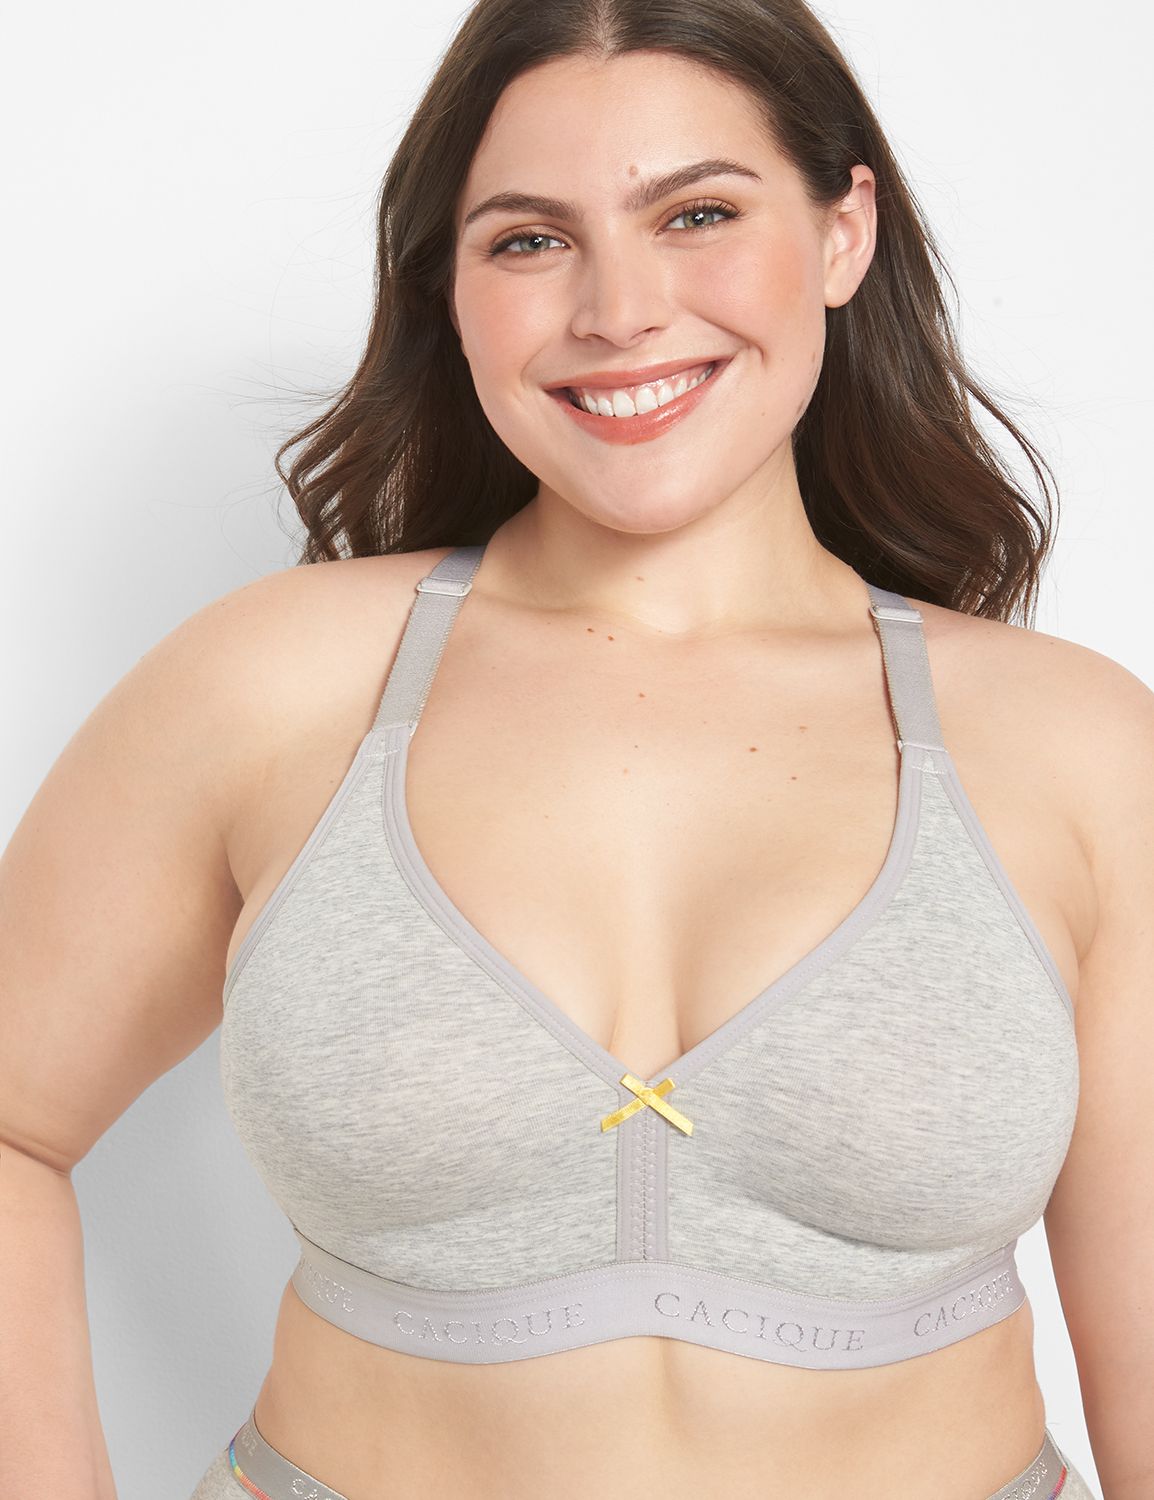 Lane Bryant - Your fave Cotton No-Wire bra is back, now with a